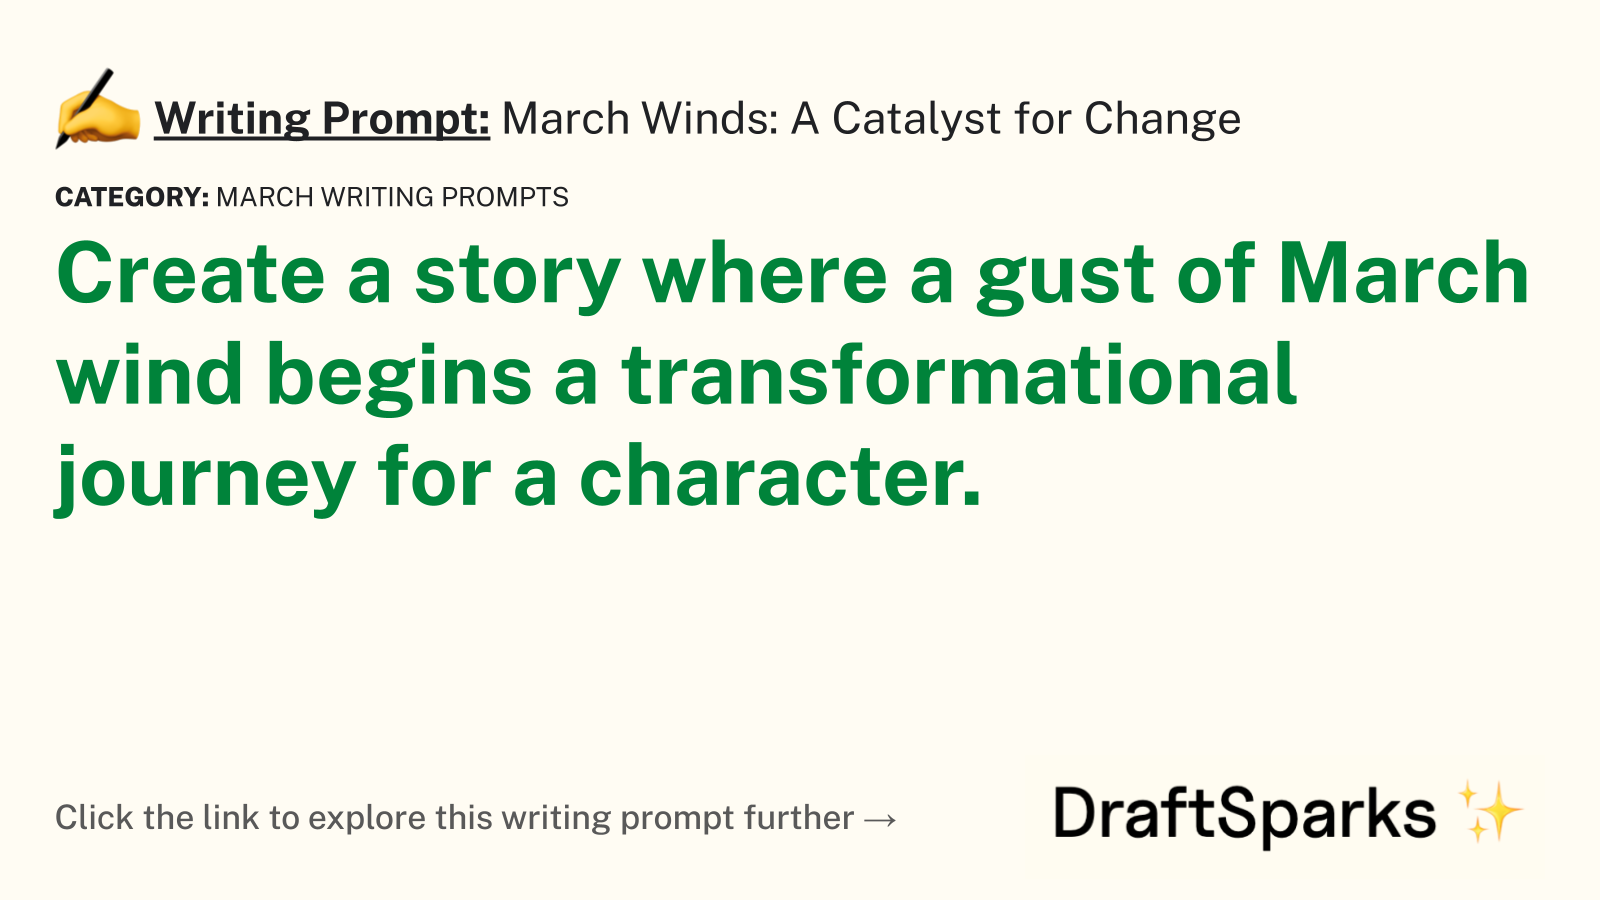 March Winds: A Catalyst for Change